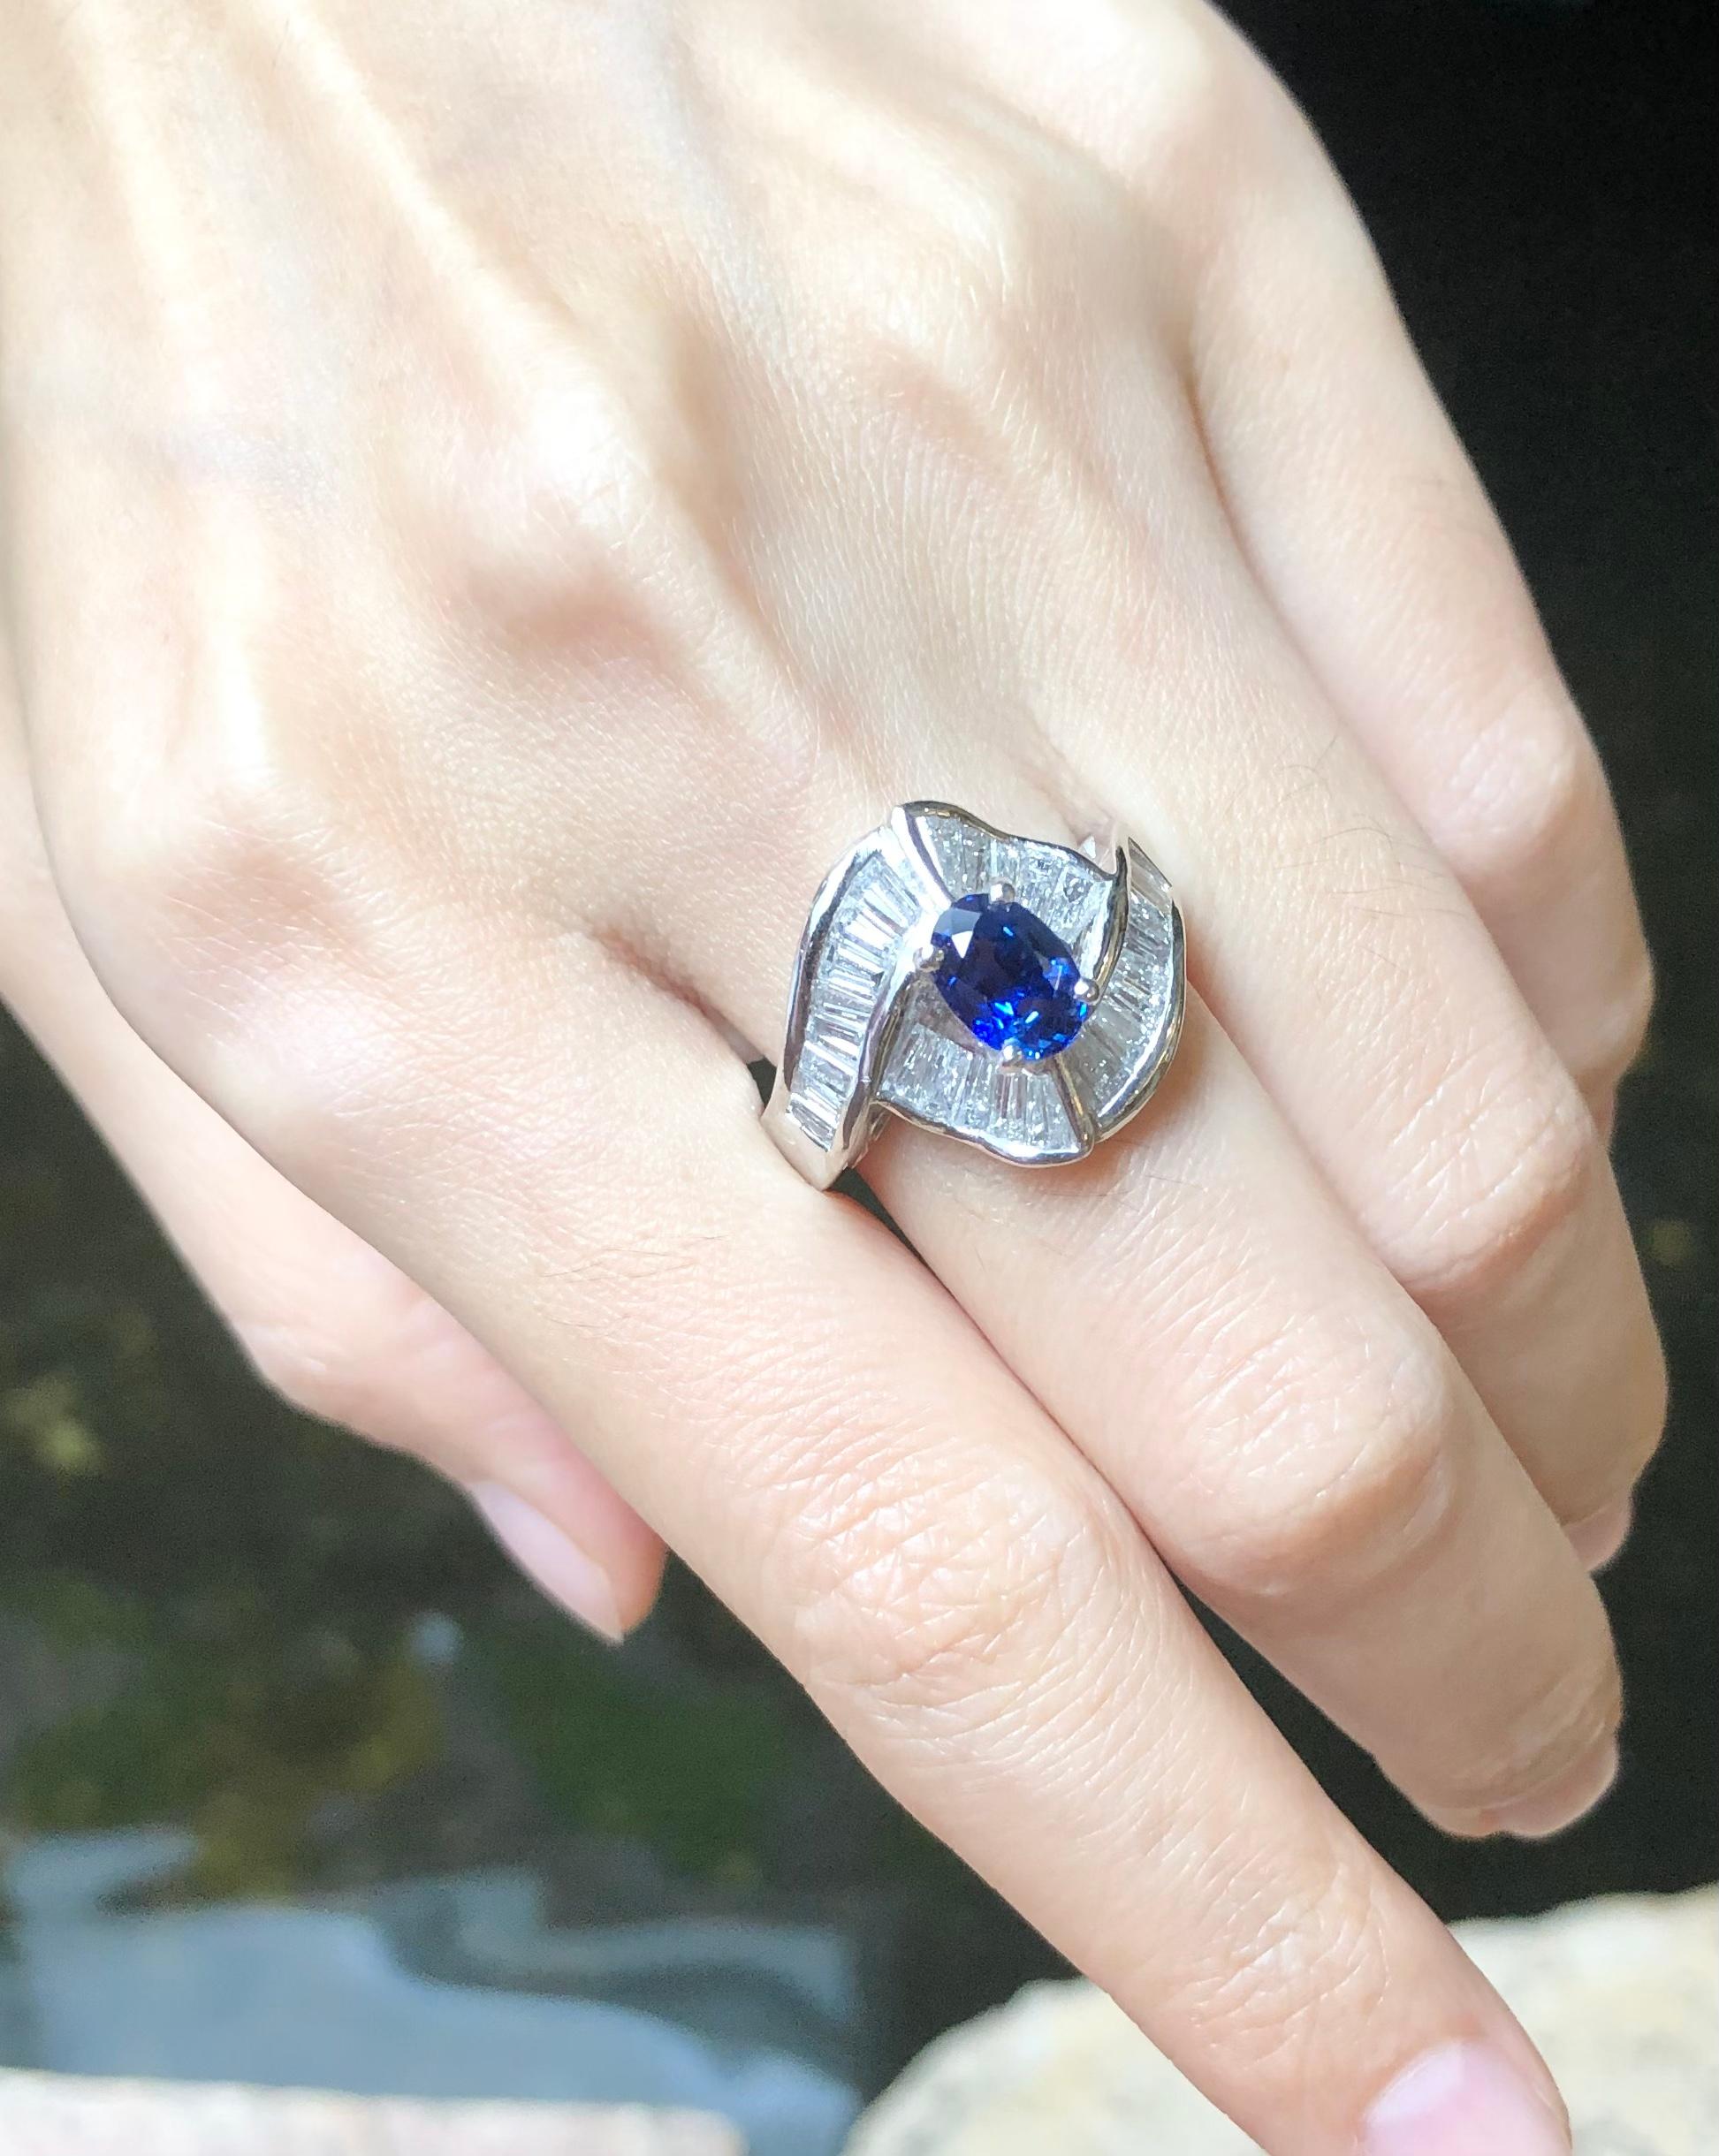 Blue Sapphire 1.31 carats with Diamond 1.67 carats Ring set in Platinum 900 Settings

Width:  2.0 cm 
Length: 1.6 cm
Ring Size: 55
Total Weight: 12.57 grams

Blue Sapphire 
Width:  0.5 cm 
Length: 0.7 cm

